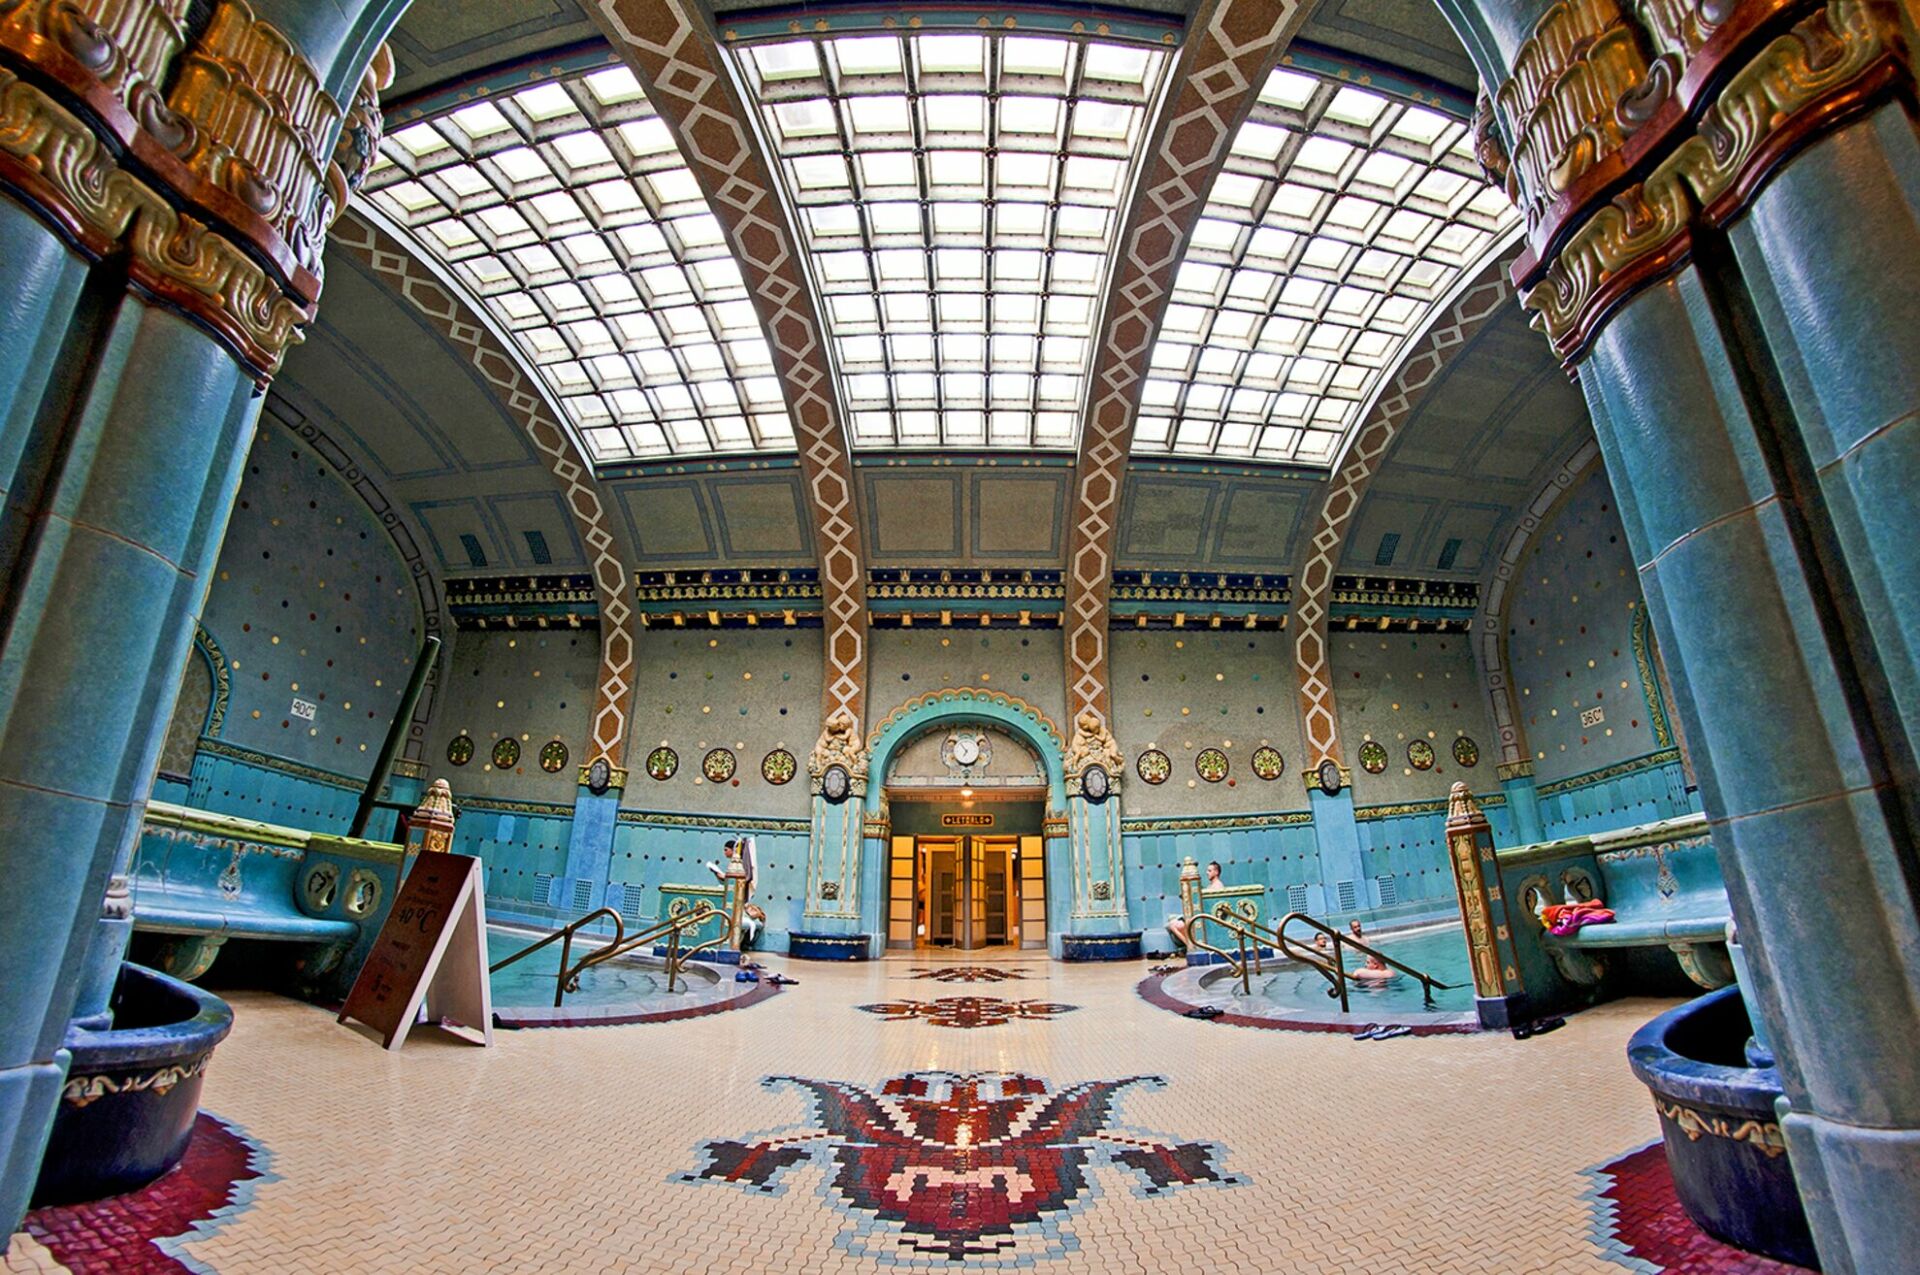 Interior of the Gellért Thermal Baths with its famous turquoise tiles and ceramics